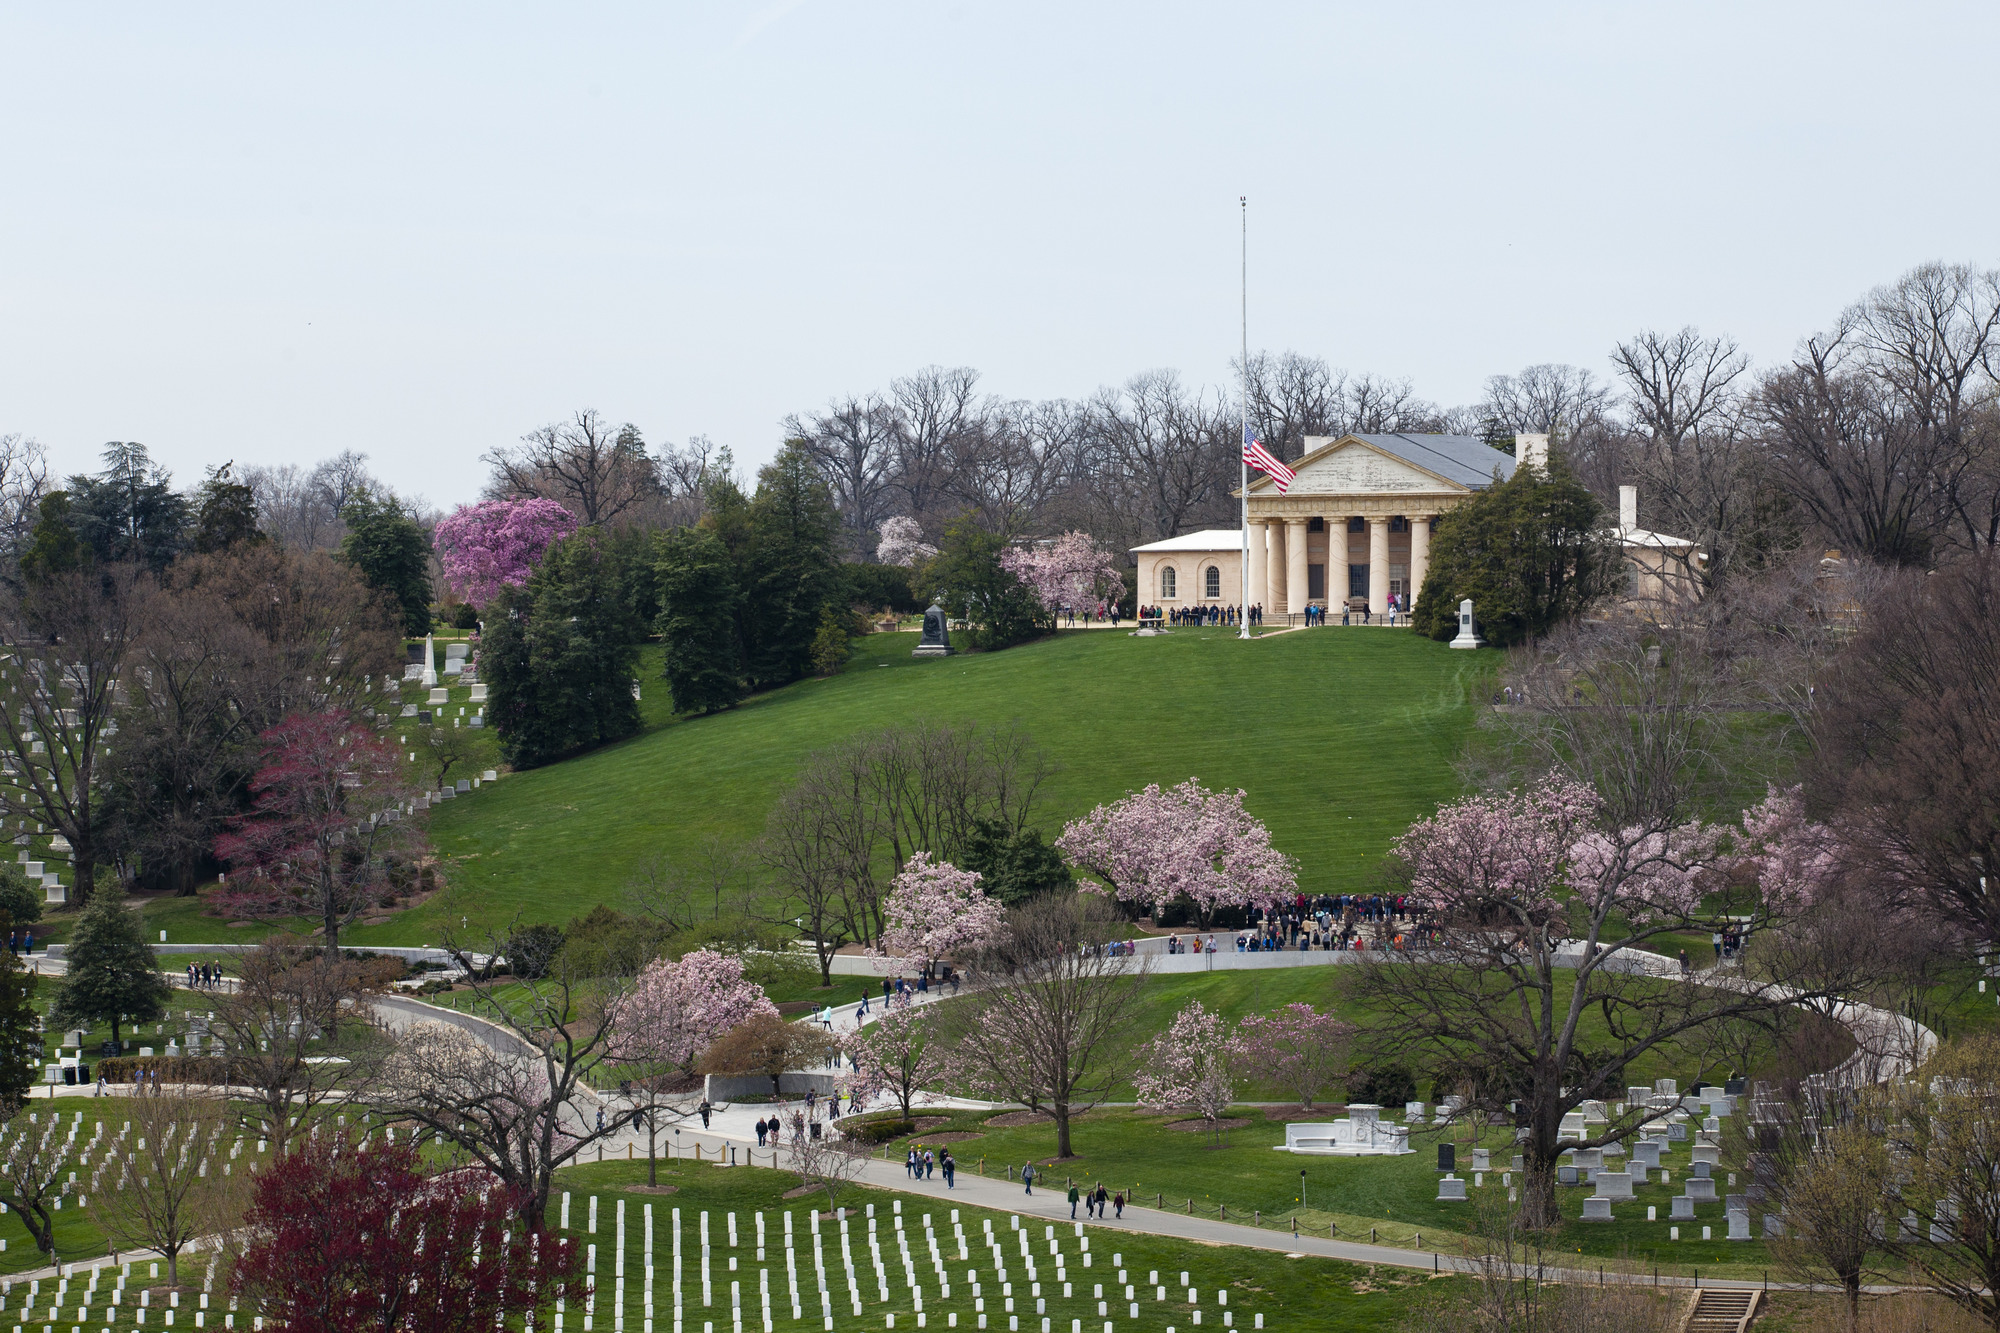 An aerial view of Arlington House in the spring time. Cherry blossom trees are in bloom and the flag is at half mass.